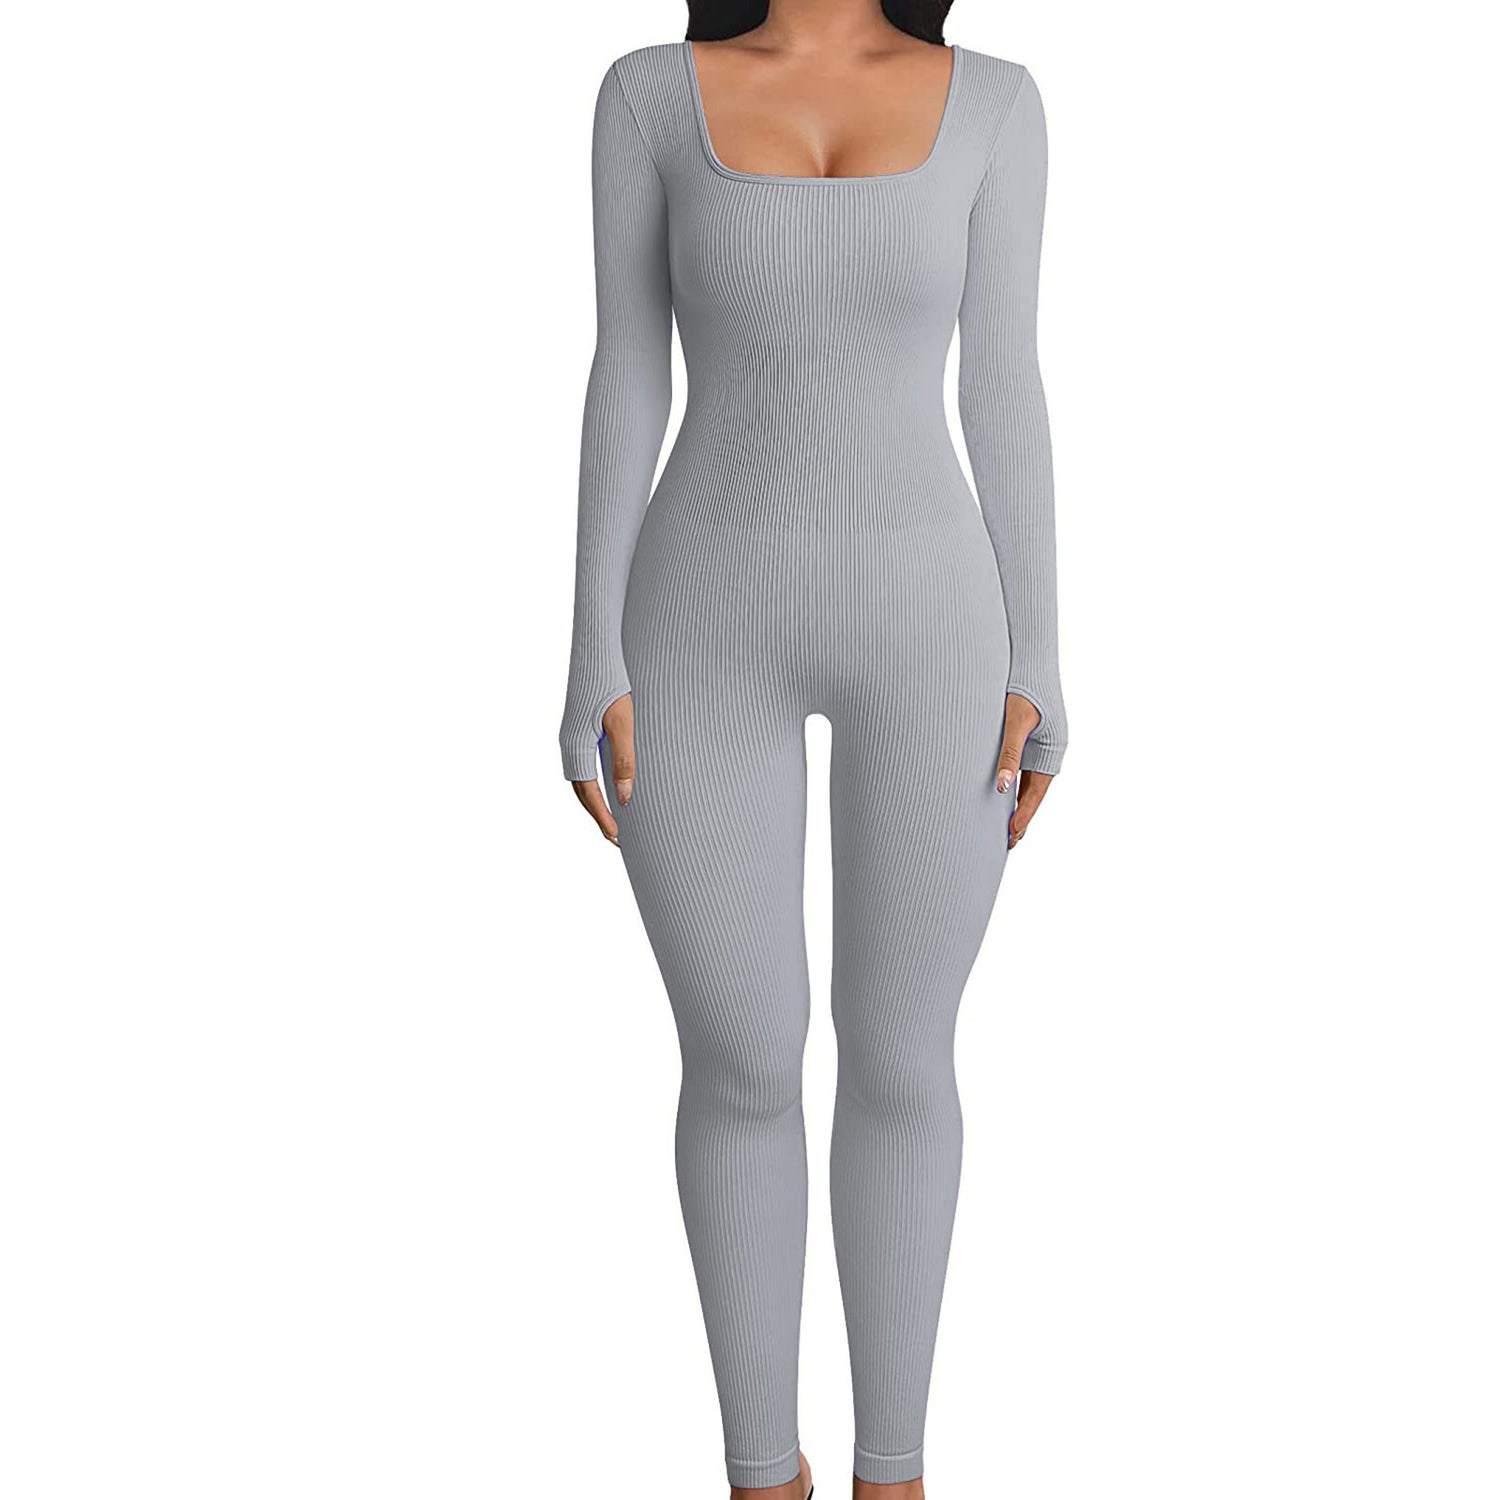 Jumpsuit  | Urban Chic: One-Piece Thread Bodysuit in Dazzling Colors – Sizes S to 3XL | 2XL |  Light Gray| thecurvestory.myshopify.com